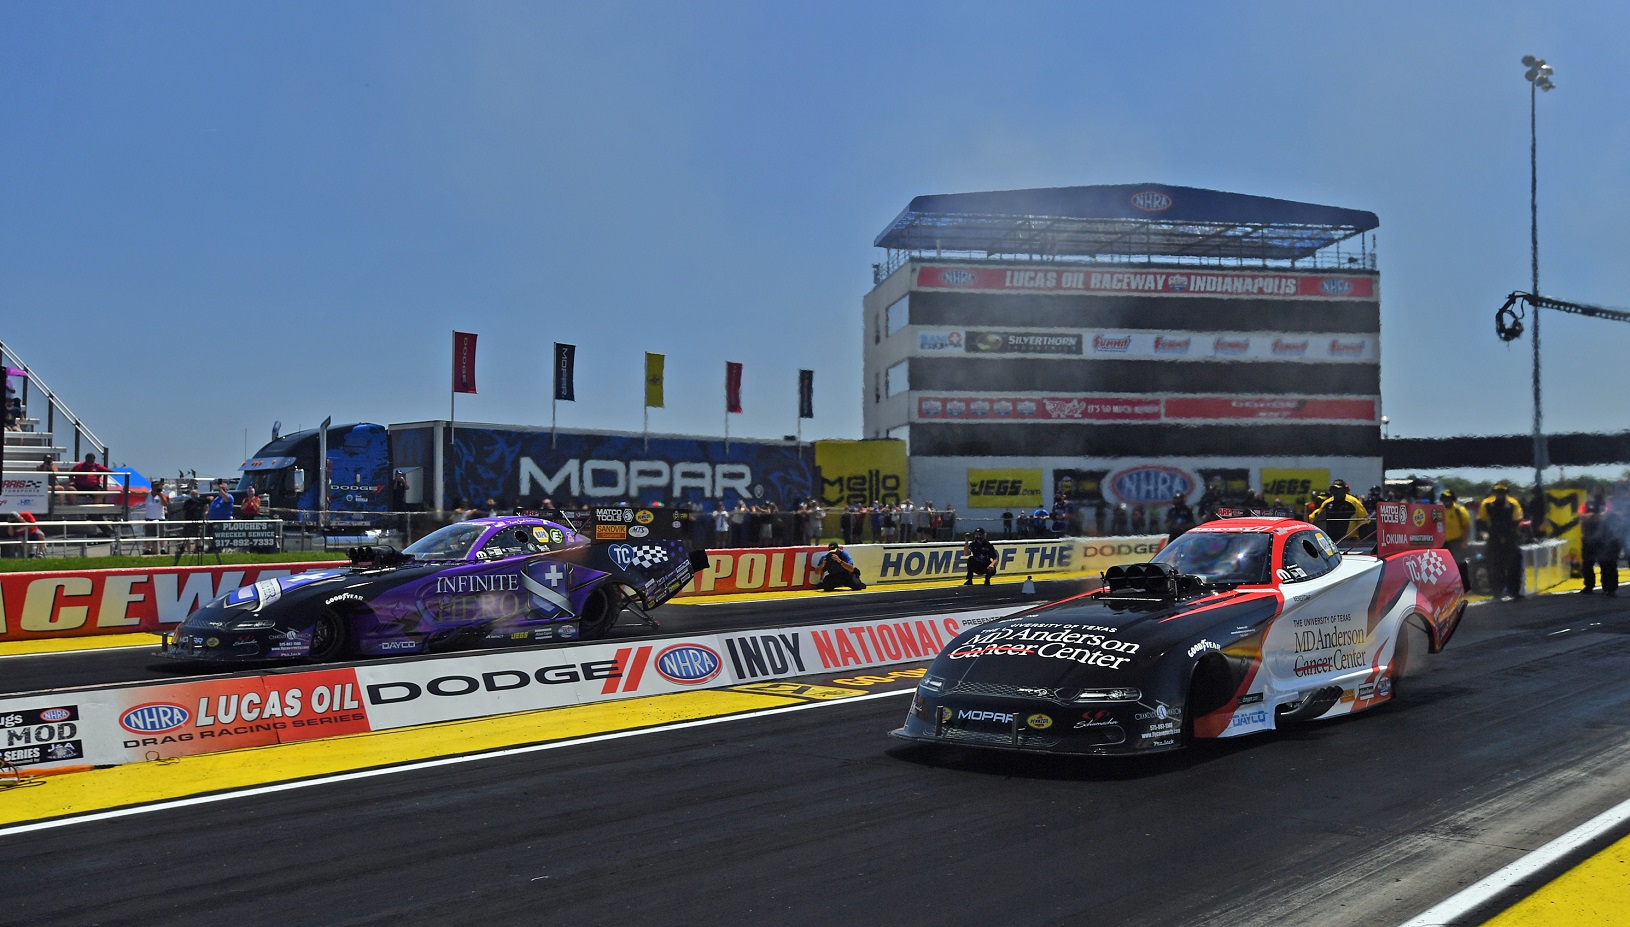 Dodge Charger of Johnson Jr. Tops Qualifying at Dodge NHRA Indy Nationals Presented by Pennzoil